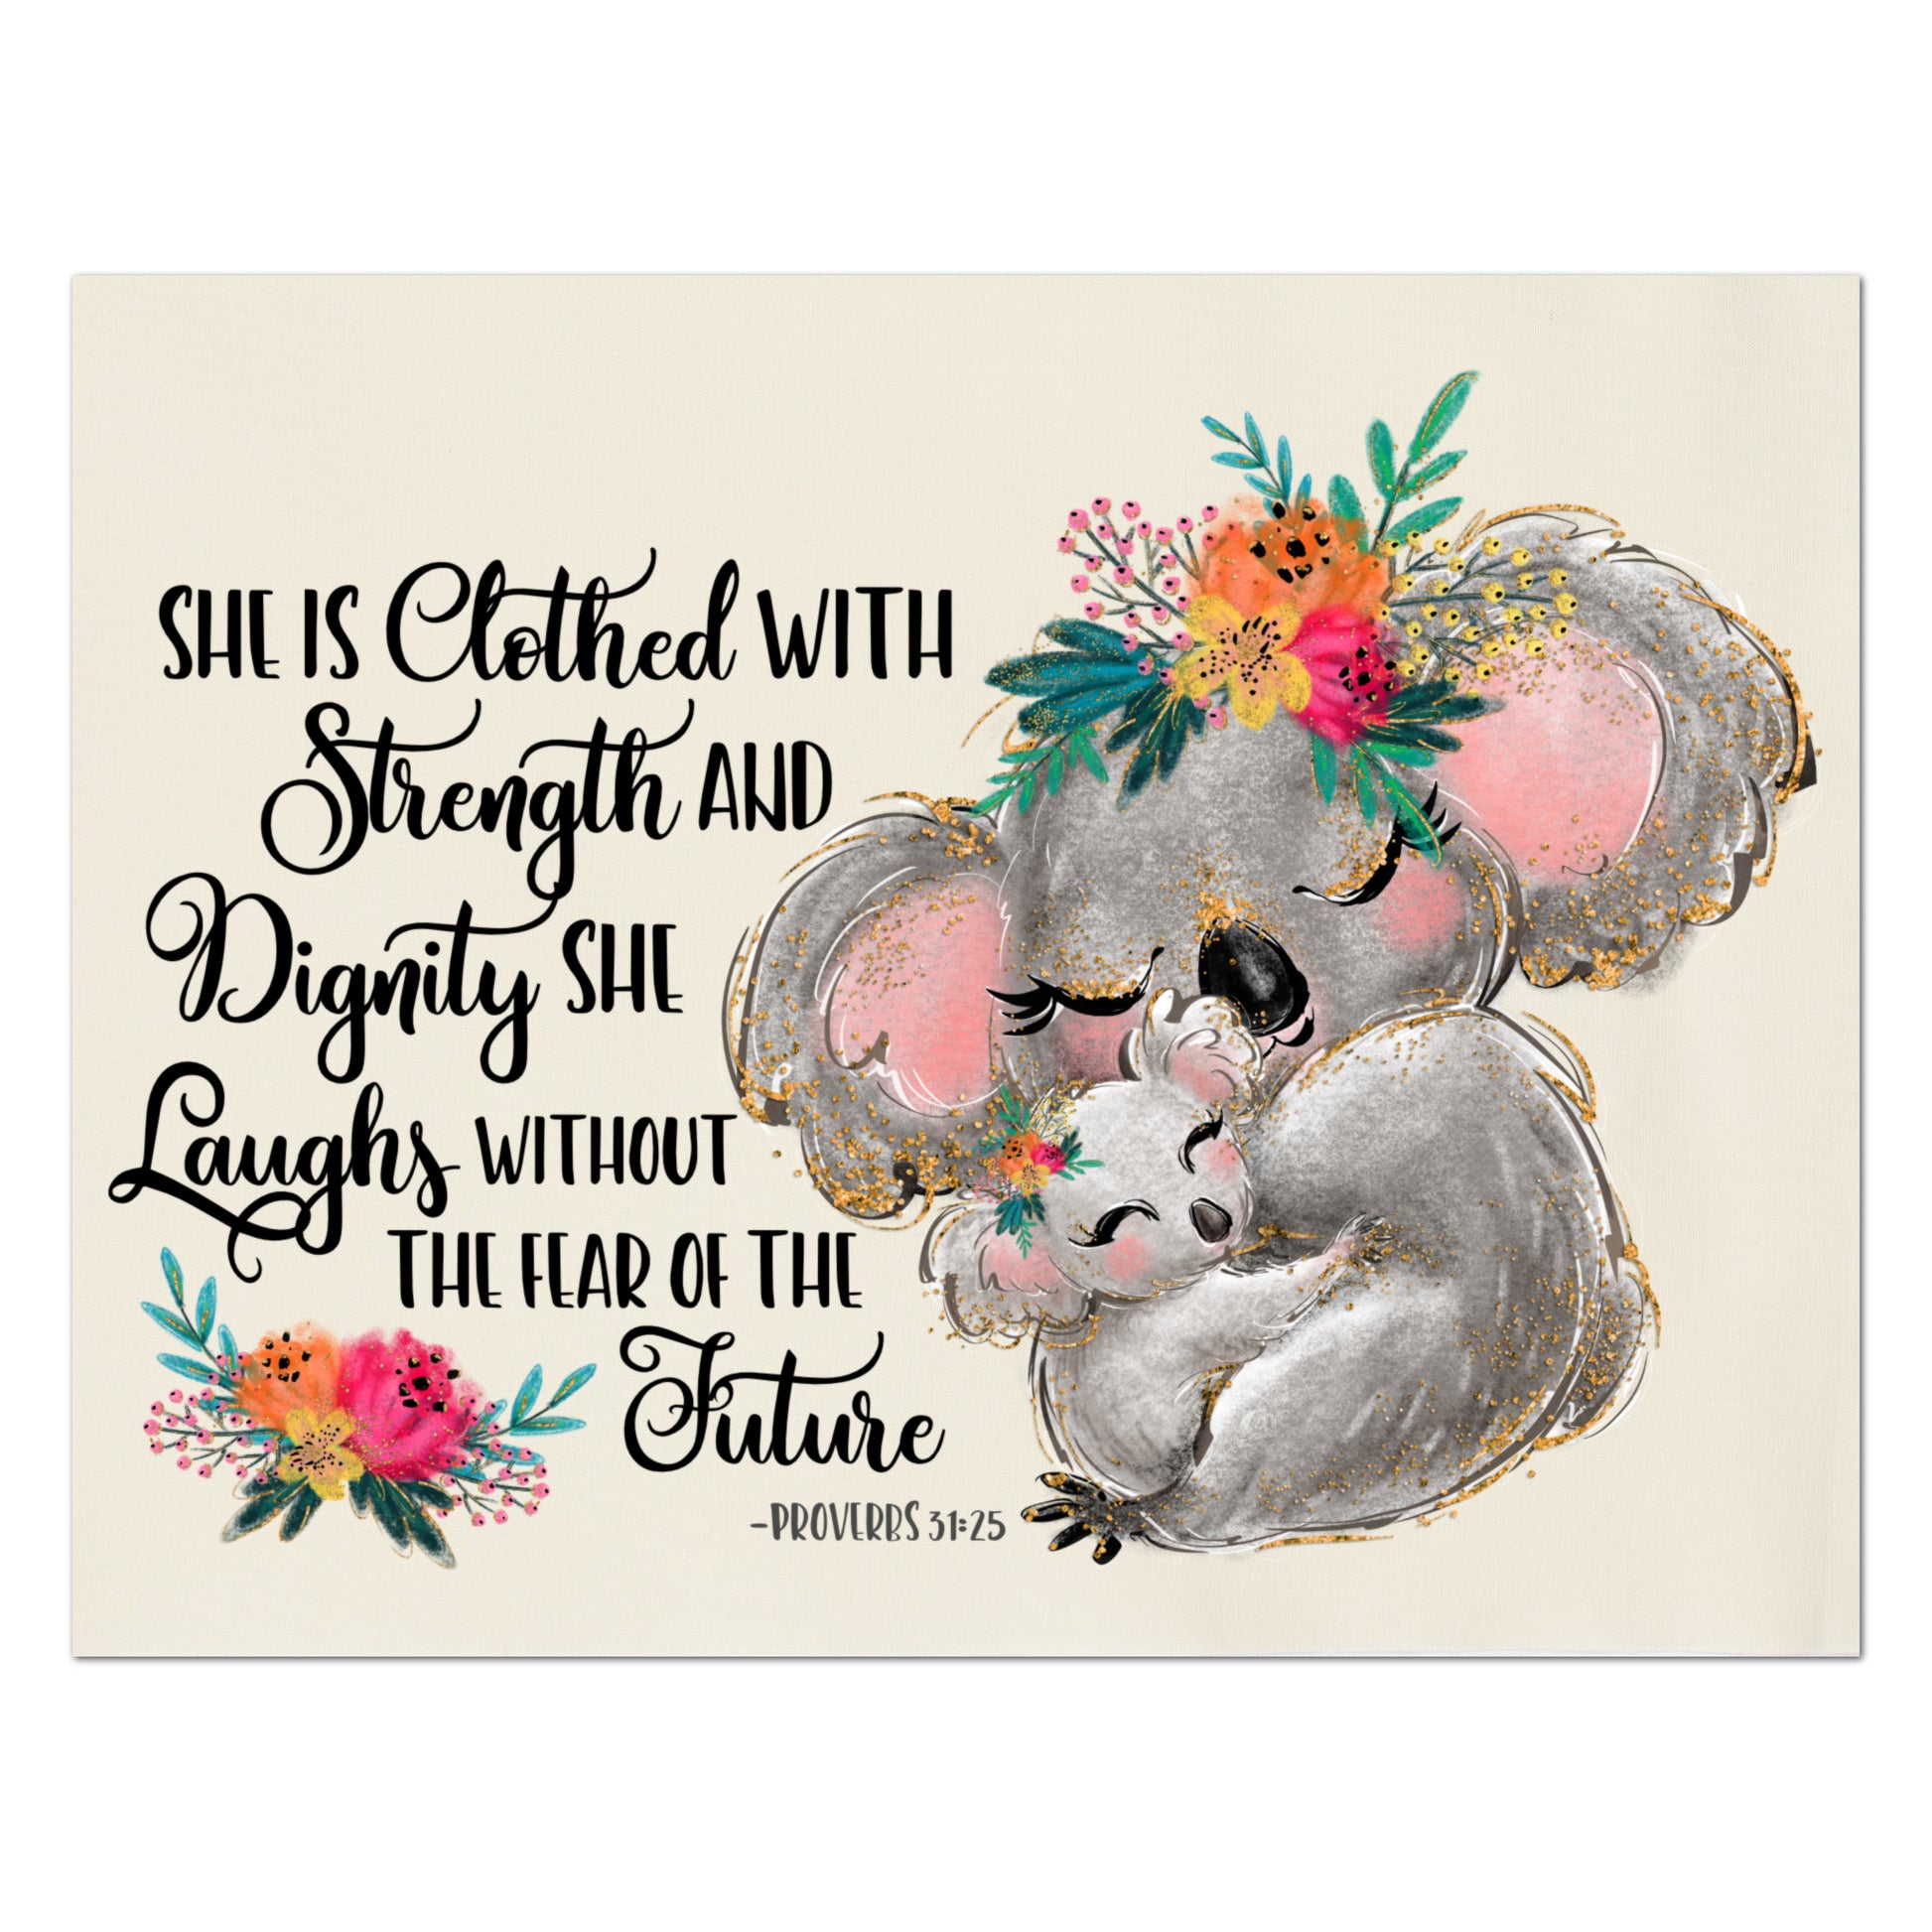 Baby Fabric Panels - Strength and Dignity, Proverbs 31 25, Scripture, –  McKinney Printing Company, LLC